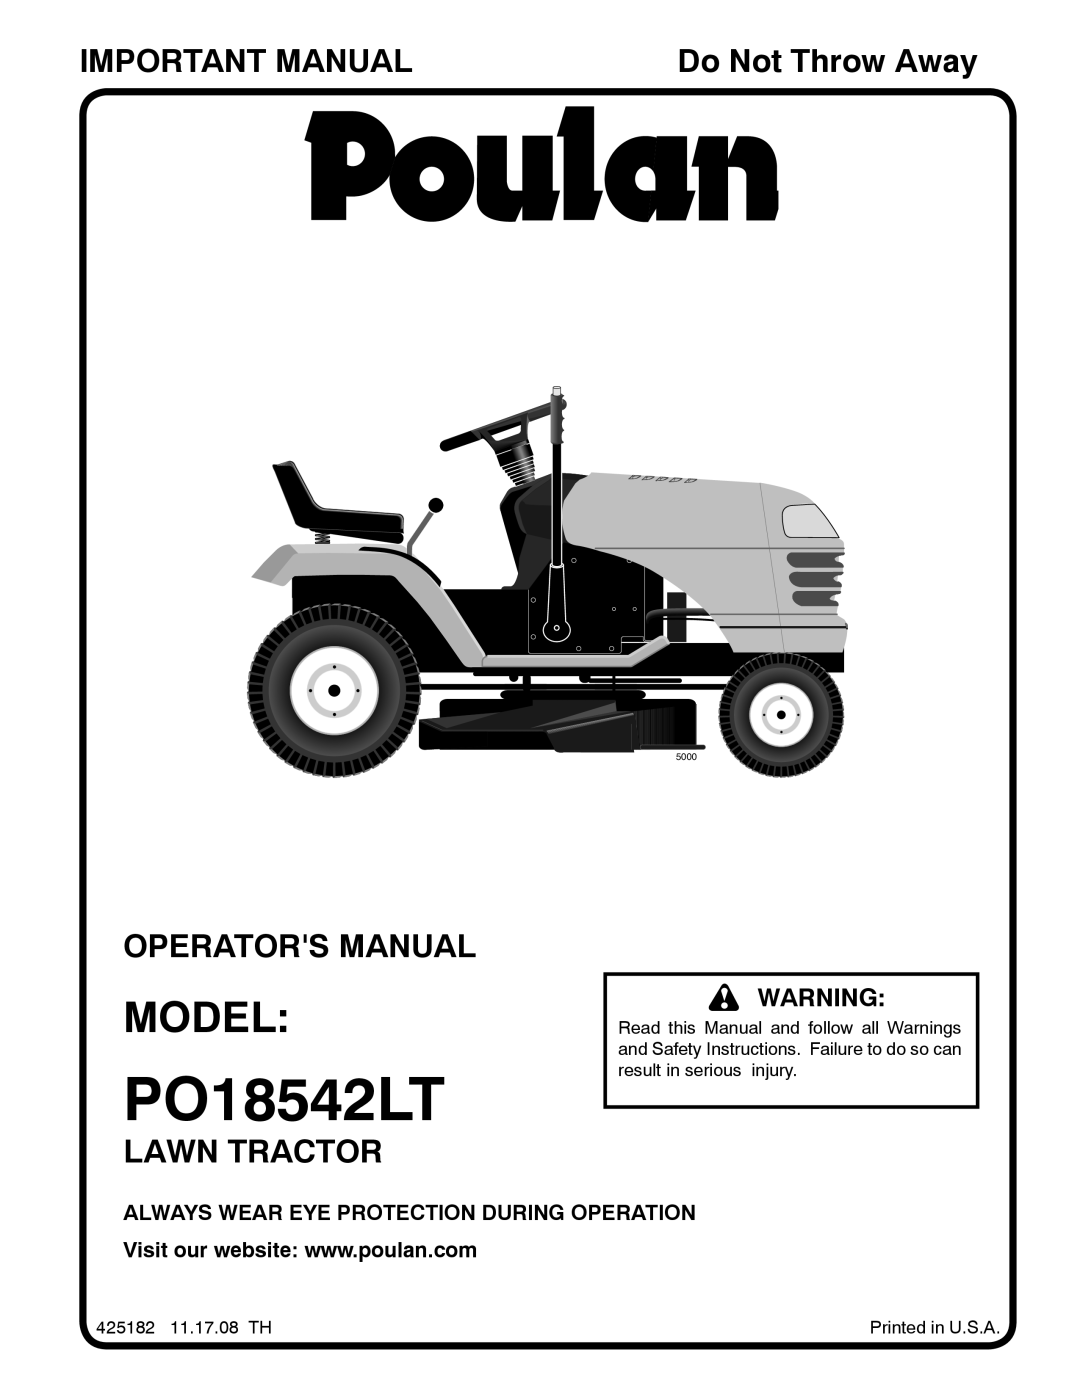 Poulan PO18542LT manual Model, Important Manual, Operators Manual, Lawn Tractor, Do Not Throw Away, 5000 